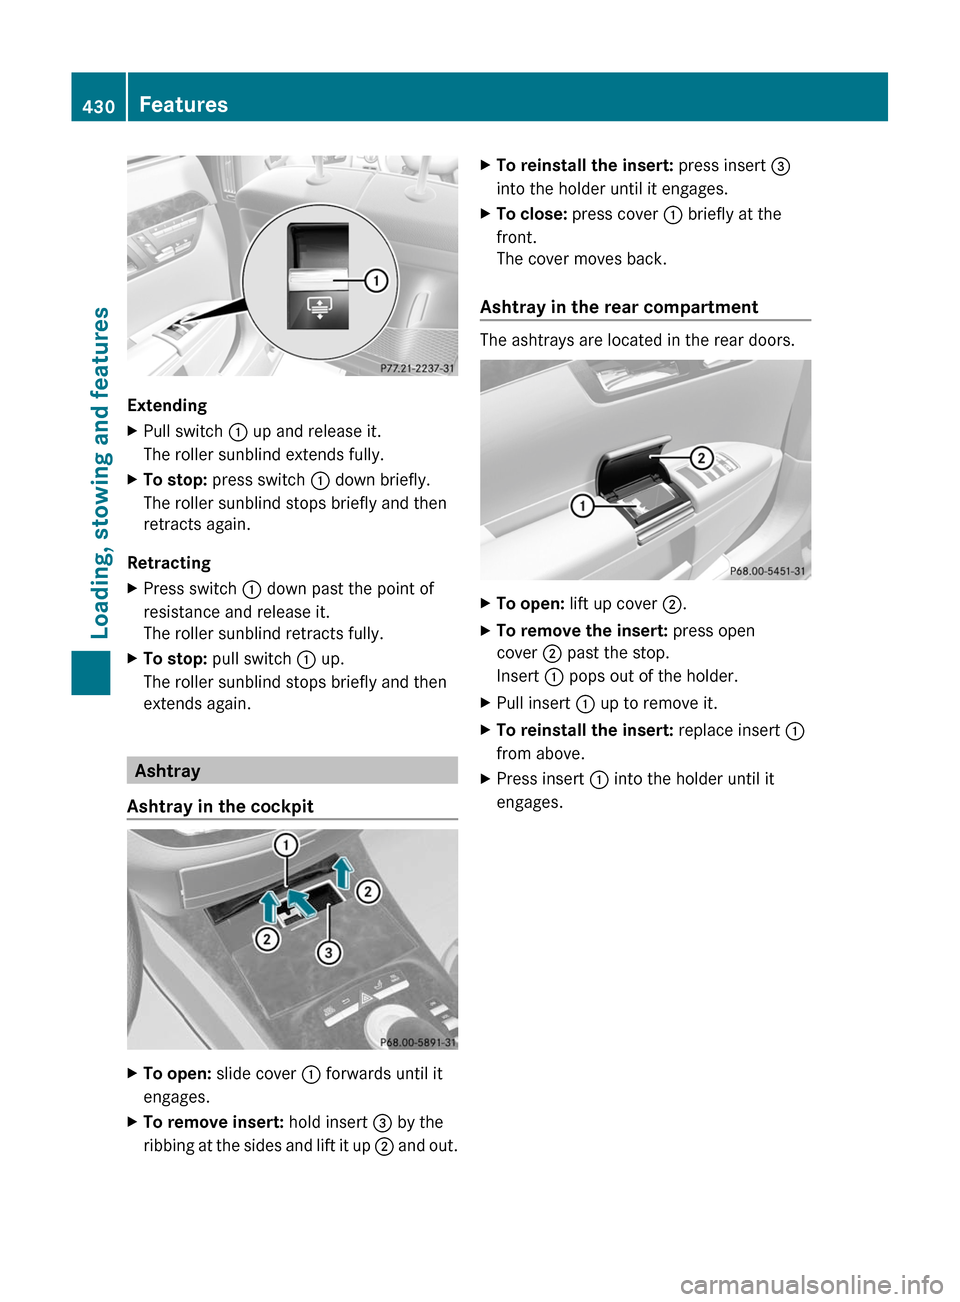 MERCEDES-BENZ S-Class 2011 W221 Owners Manual Extending
XPull switch : up and release it.
The roller sunblind extends fully.
XTo stop: press switch : down briefly.
The roller sunblind stops briefly and then
retracts again.
Retracting
XPress switc